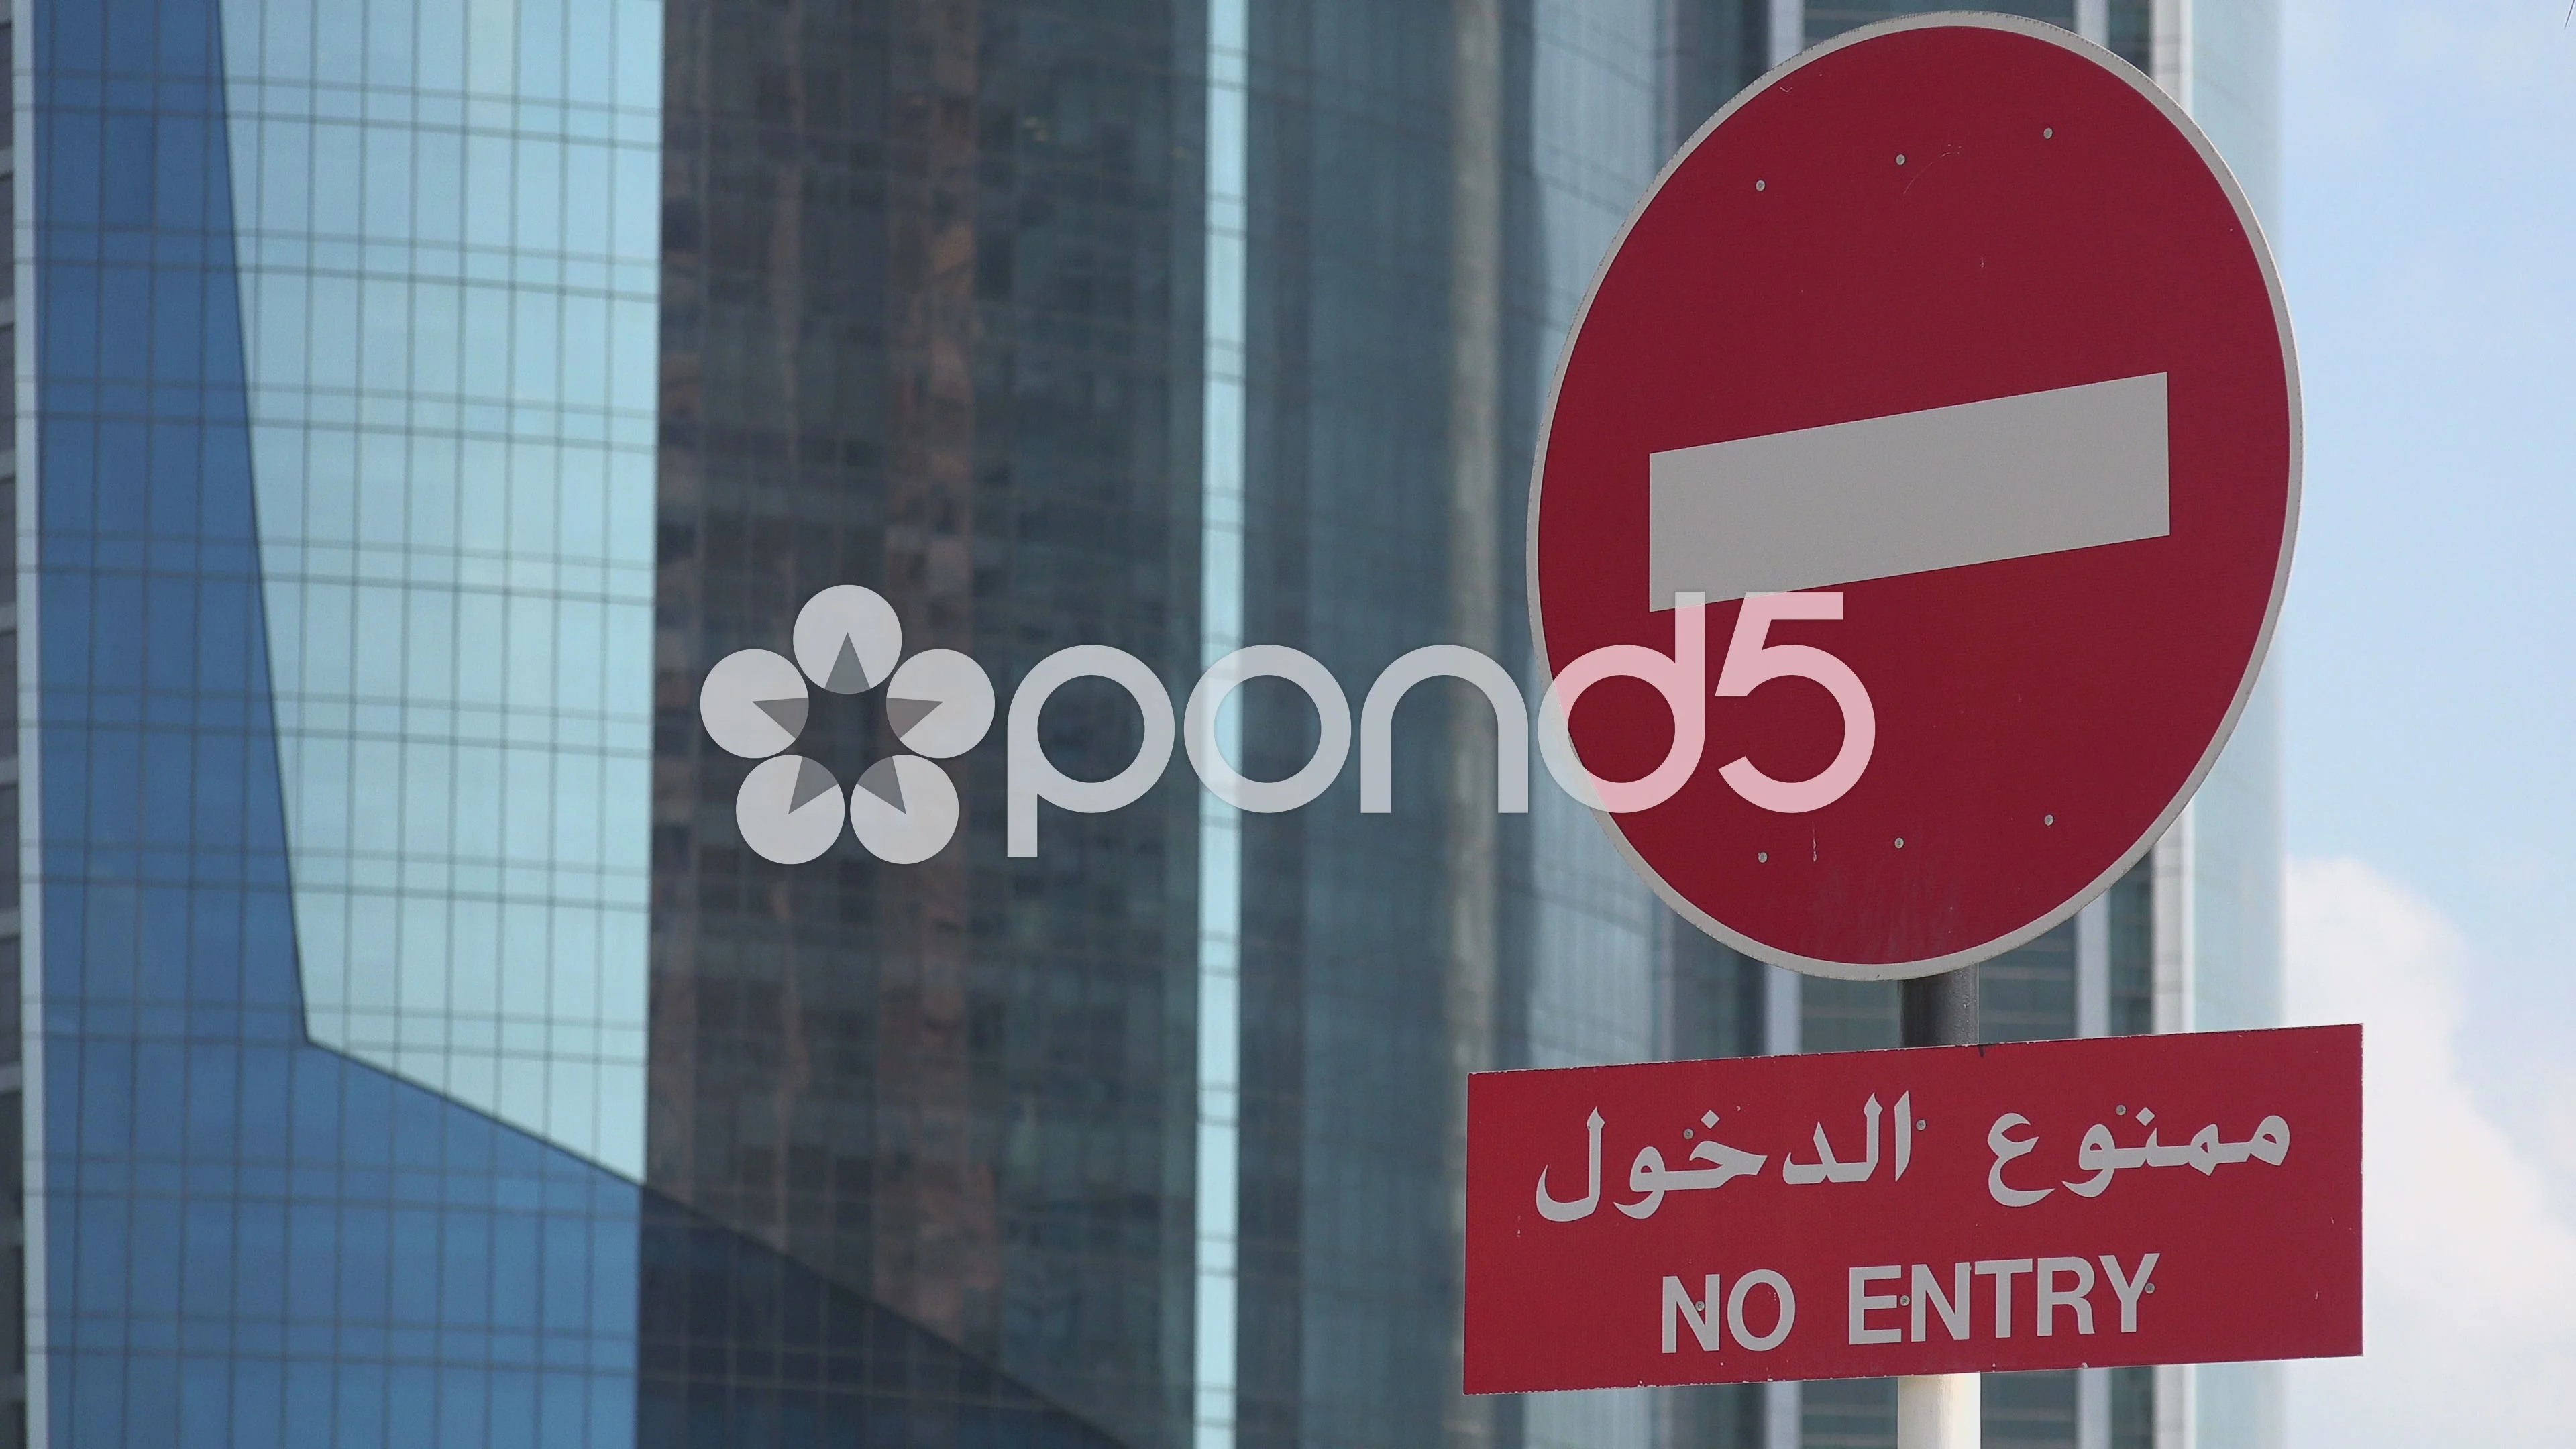 No entry sign in Arabic in front of Etih, Stock Video